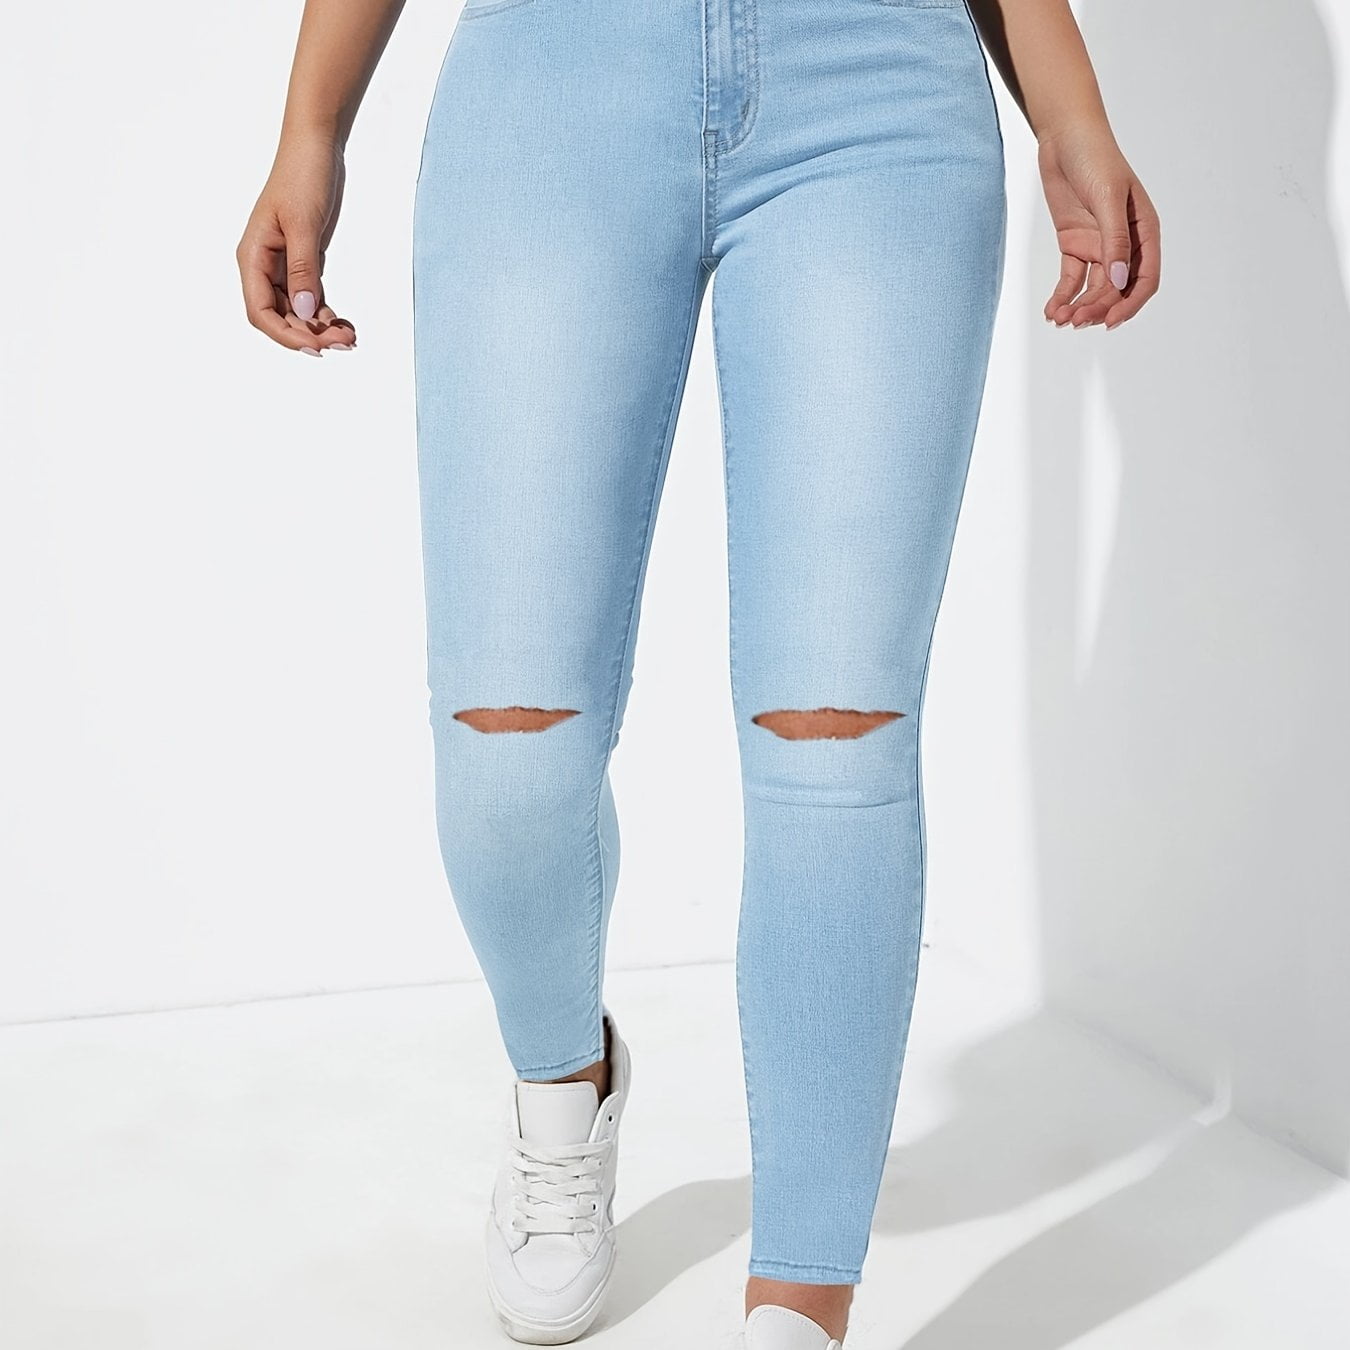 High Rise Ripped Knees Skinny Jeans Tight Fit Stretchy Distressed Denim  Pants Women's Denim & Clothing - Walmart.com